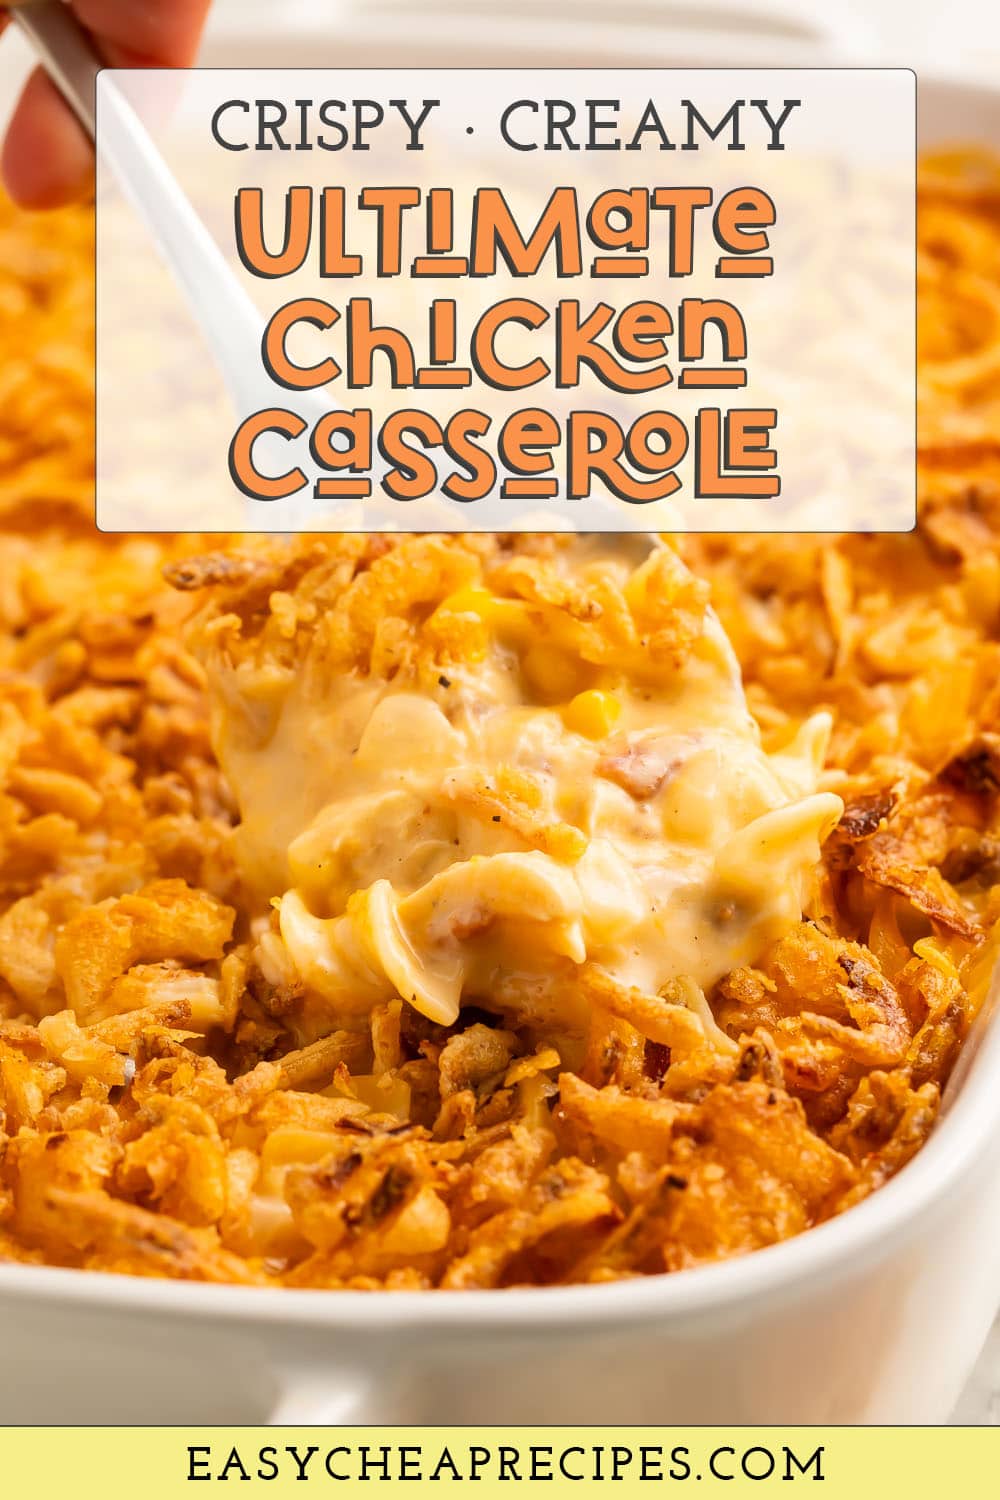 Pin graphic for ultimate chicken casserole.